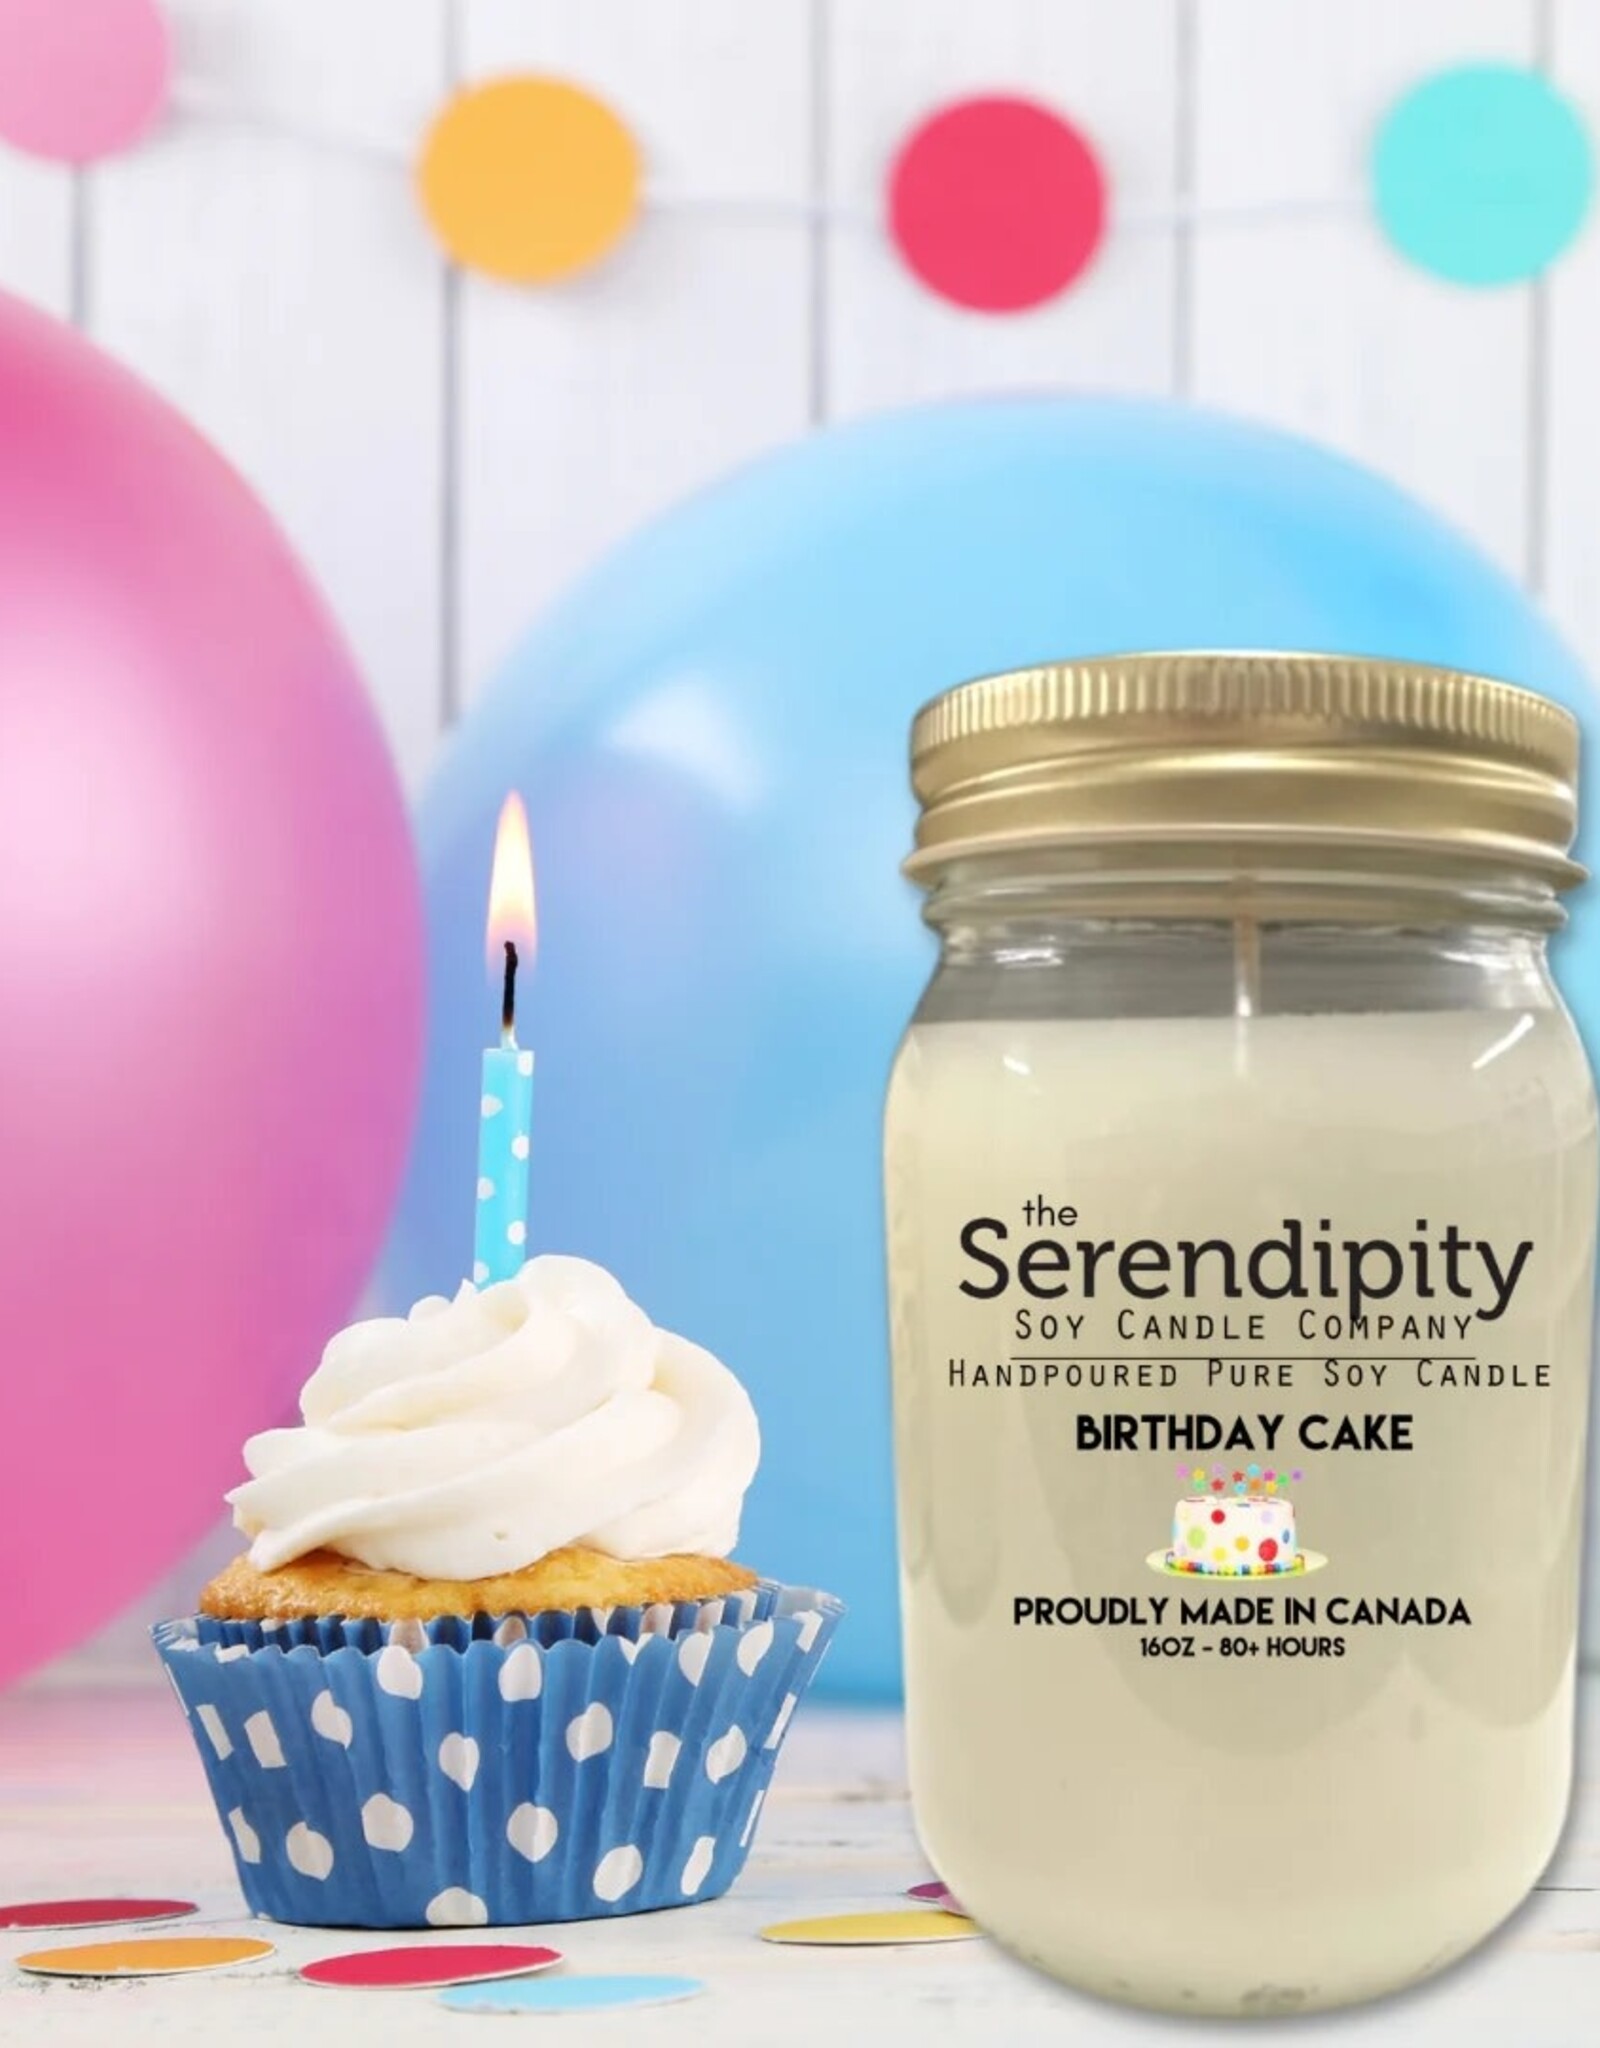 Serendipity Soy Candles 16oz Jar Candle - Birthday Cake